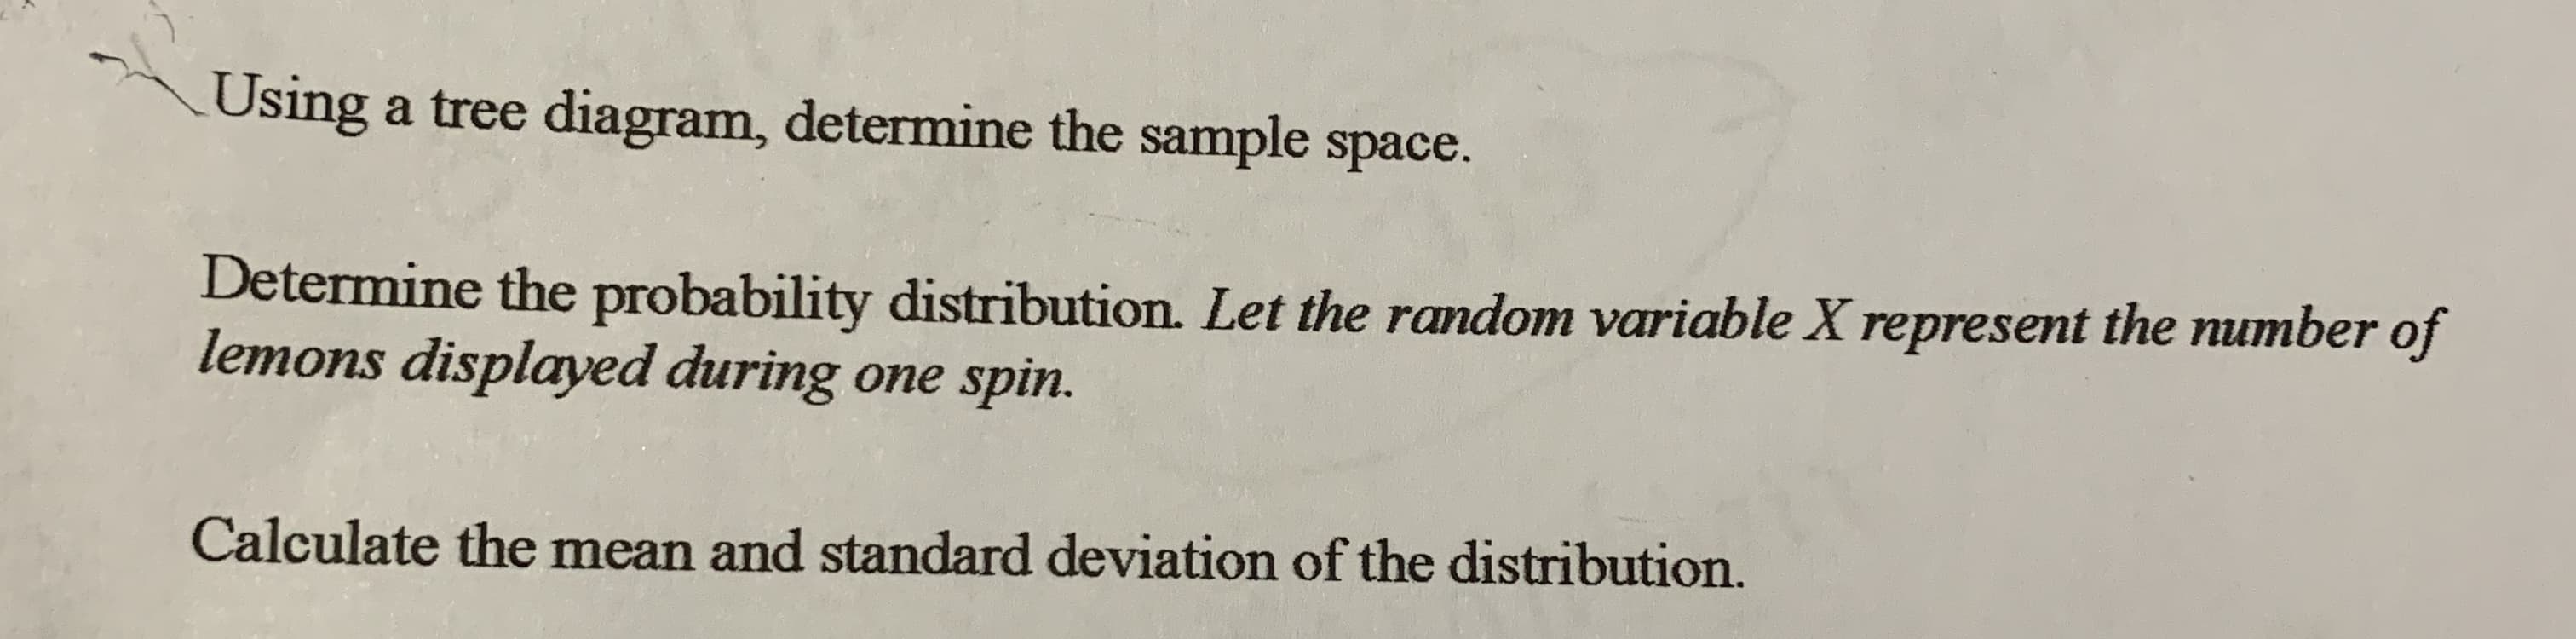 Using a tree diagram, determine the sample space.
Determine the probability distribution. Let the random variable X represent the number of
lemons displayed during one spin.
Calculate the mean and standard deviation of the distribution.
